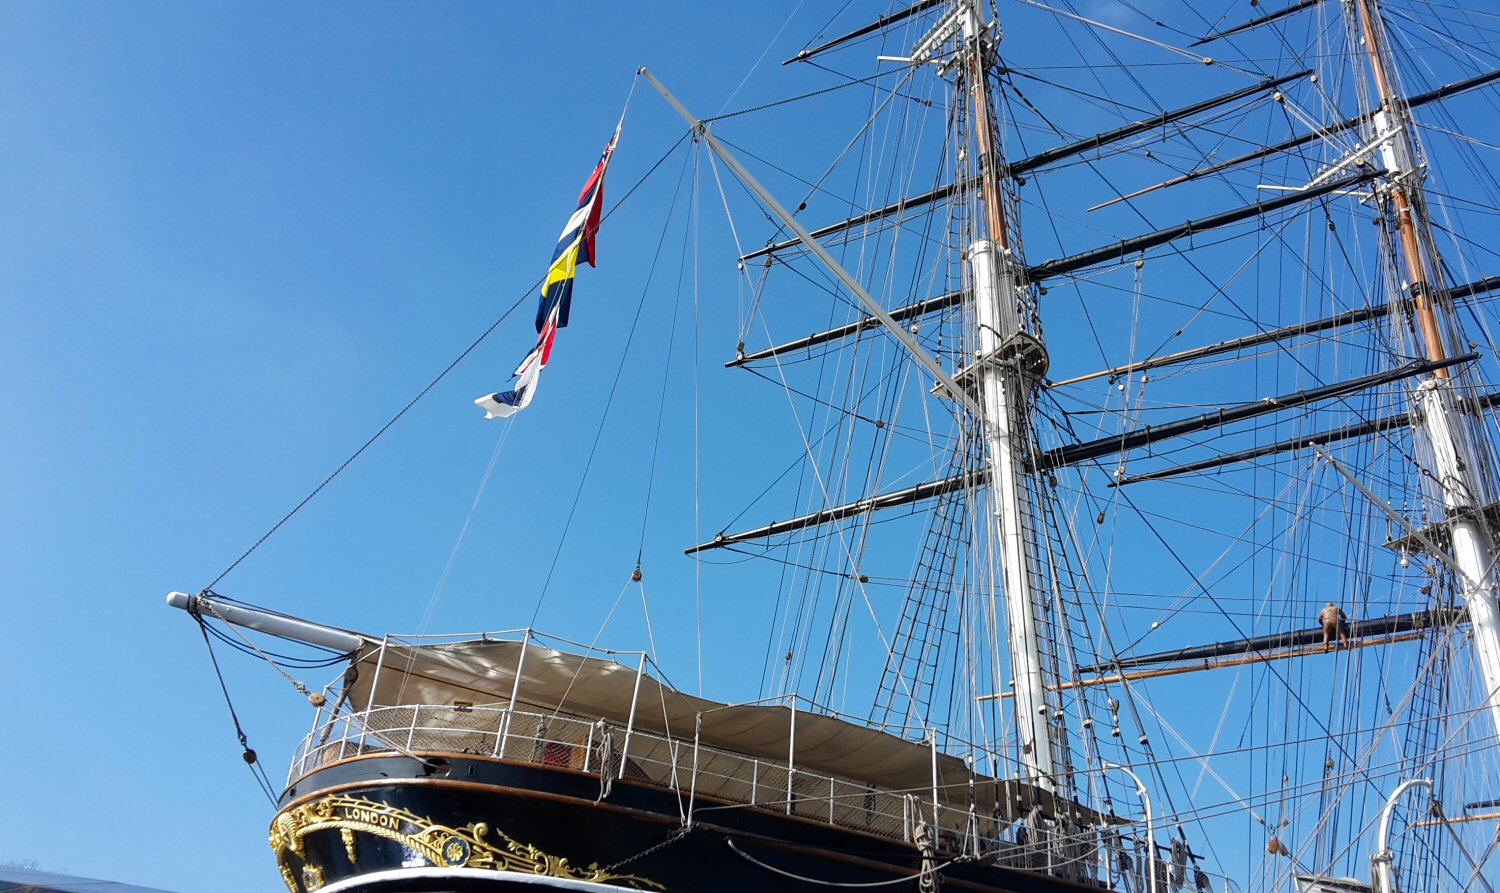 Visiting the Cutty Sark in Greenwich after a boat ride along the Thames - one of my 22 top things to do on the Thames, London, with kids or without